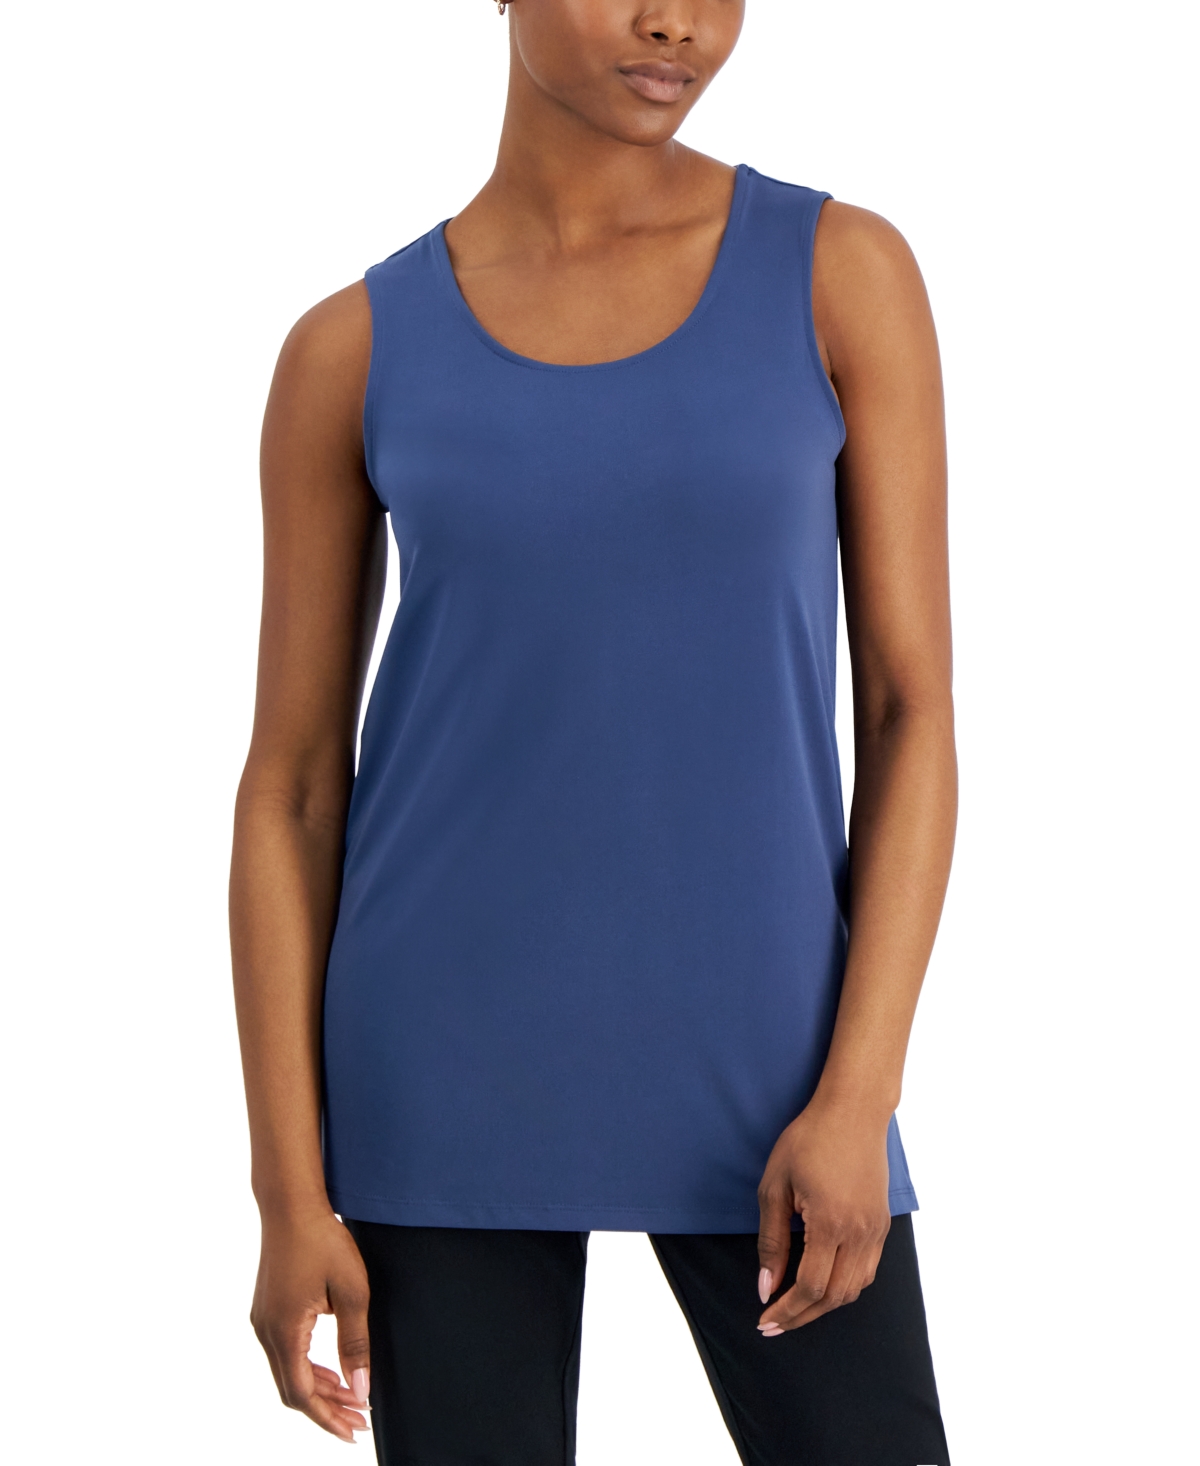 Petite Knit Tank Top, Created for Macy's - Blue Instinct